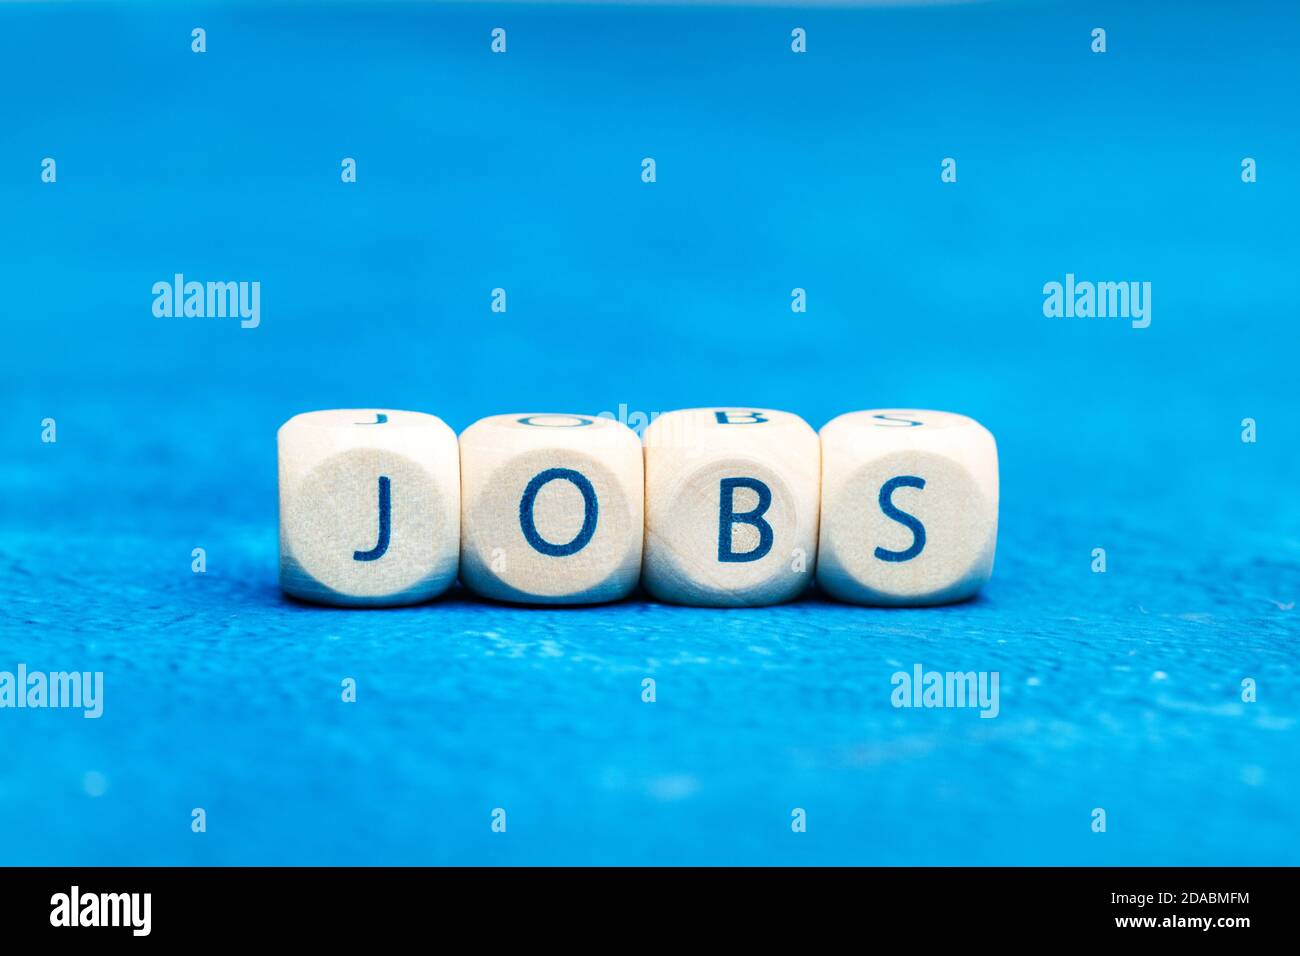 Jobs word made with wooden letter cubes on a classic blue background Stock Photo